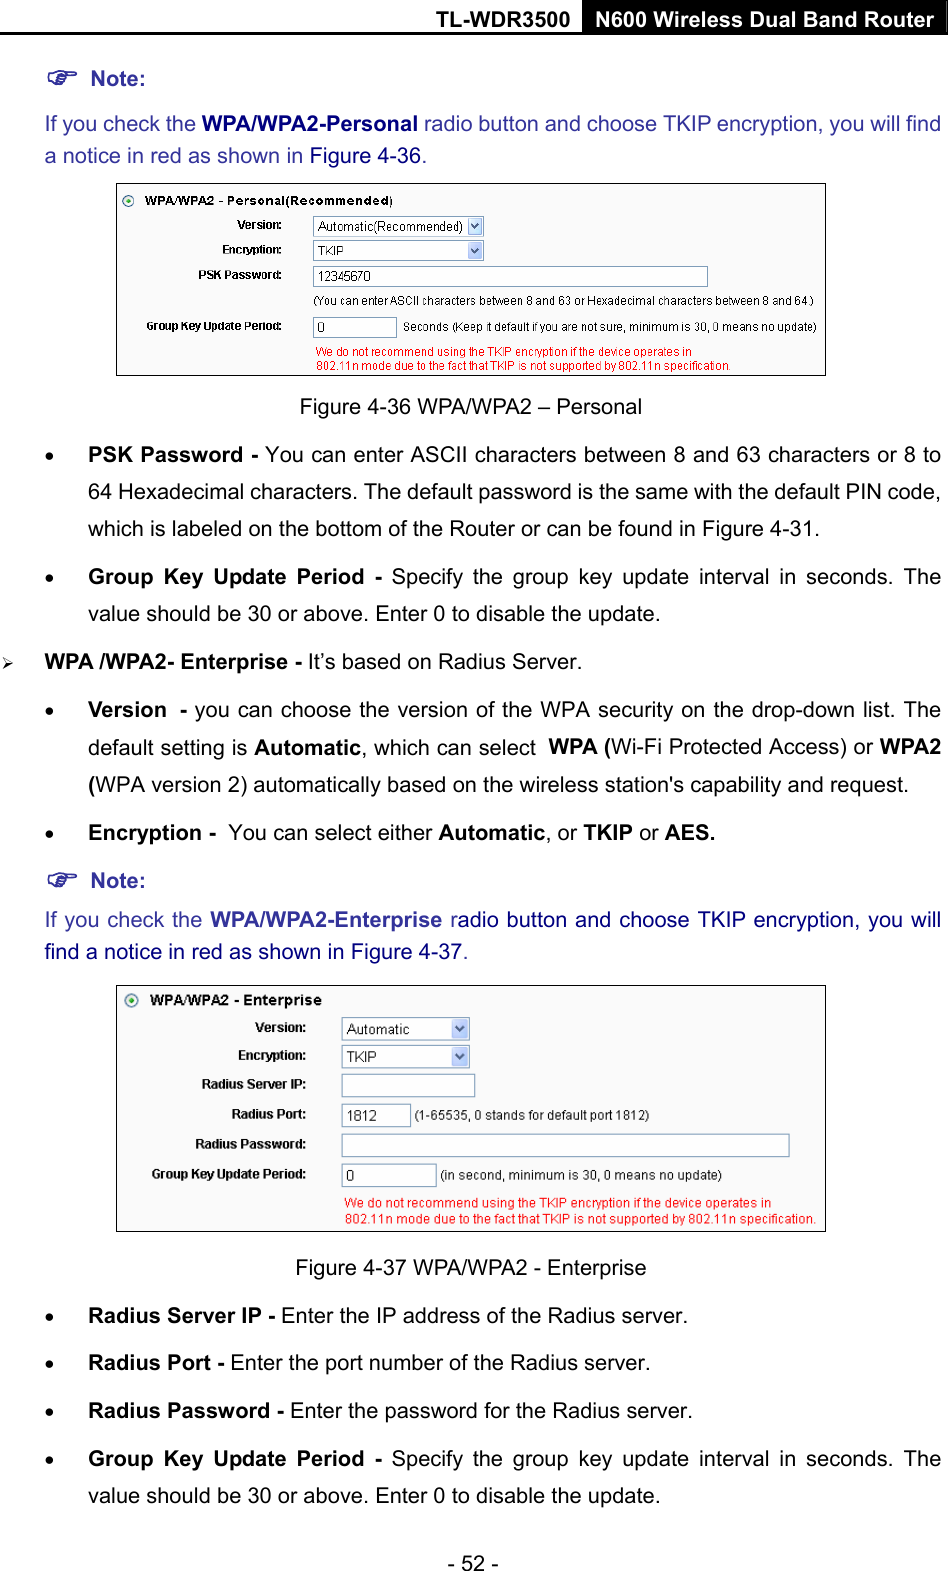 TL-WDR3500 N600 Wireless Dual Band Router - 52 -  Note:  If you check the WPA/WPA2-Personal radio button and choose TKIP encryption, you will find a notice in red as shown in Figure 4-36.  Figure 4-36 WPA/WPA2 – Personal  PSK Password - You can enter ASCII characters between 8 and 63 characters or 8 to 64 Hexadecimal characters. The default password is the same with the default PIN code, which is labeled on the bottom of the Router or can be found in Figure 4-31.  Group Key Update Period - Specify the group key update interval in seconds. The value should be 30 or above. Enter 0 to disable the update.  WPA /WPA2- Enterprise - It’s based on Radius Server.  Version - you can choose the version of the WPA security on the drop-down list. The default setting is Automatic, which can select WPA (Wi-Fi Protected Access) or WPA2 (WPA version 2) automatically based on the wireless station&apos;s capability and request.  Encryption - You can select either Automatic, or TKIP or AES.  Note: If you check the WPA/WPA2-Enterprise radio button and choose TKIP encryption, you will find a notice in red as shown in Figure 4-37.  Figure 4-37 WPA/WPA2 - Enterprise  Radius Server IP - Enter the IP address of the Radius server.  Radius Port - Enter the port number of the Radius server.  Radius Password - Enter the password for the Radius server.  Group Key Update Period - Specify the group key update interval in seconds. The value should be 30 or above. Enter 0 to disable the update. 